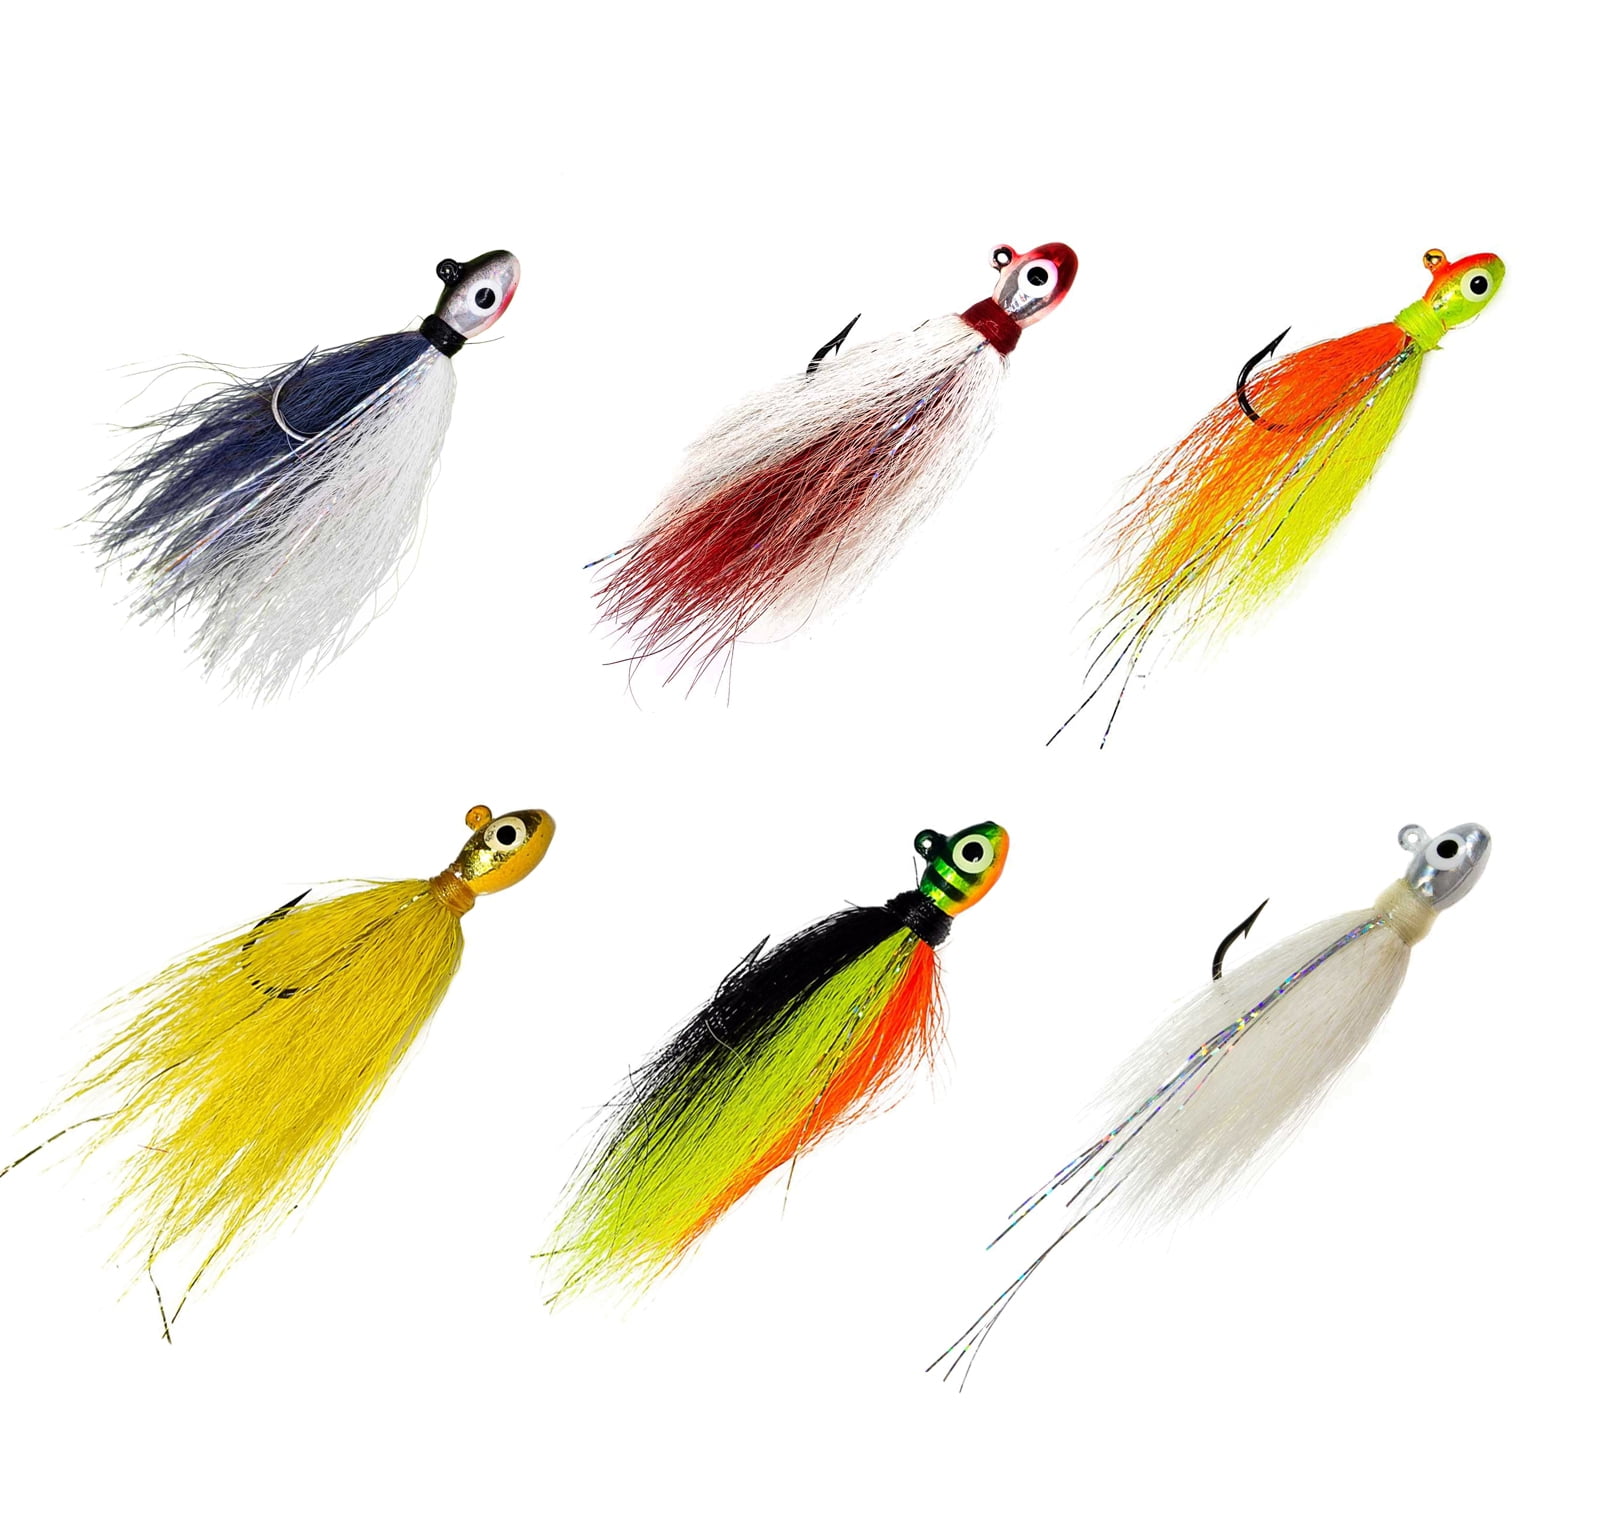 50pcs Fishing Lures Jig Heads 1/32oz with Sharp Hooks Freshwater/Saltwater New 